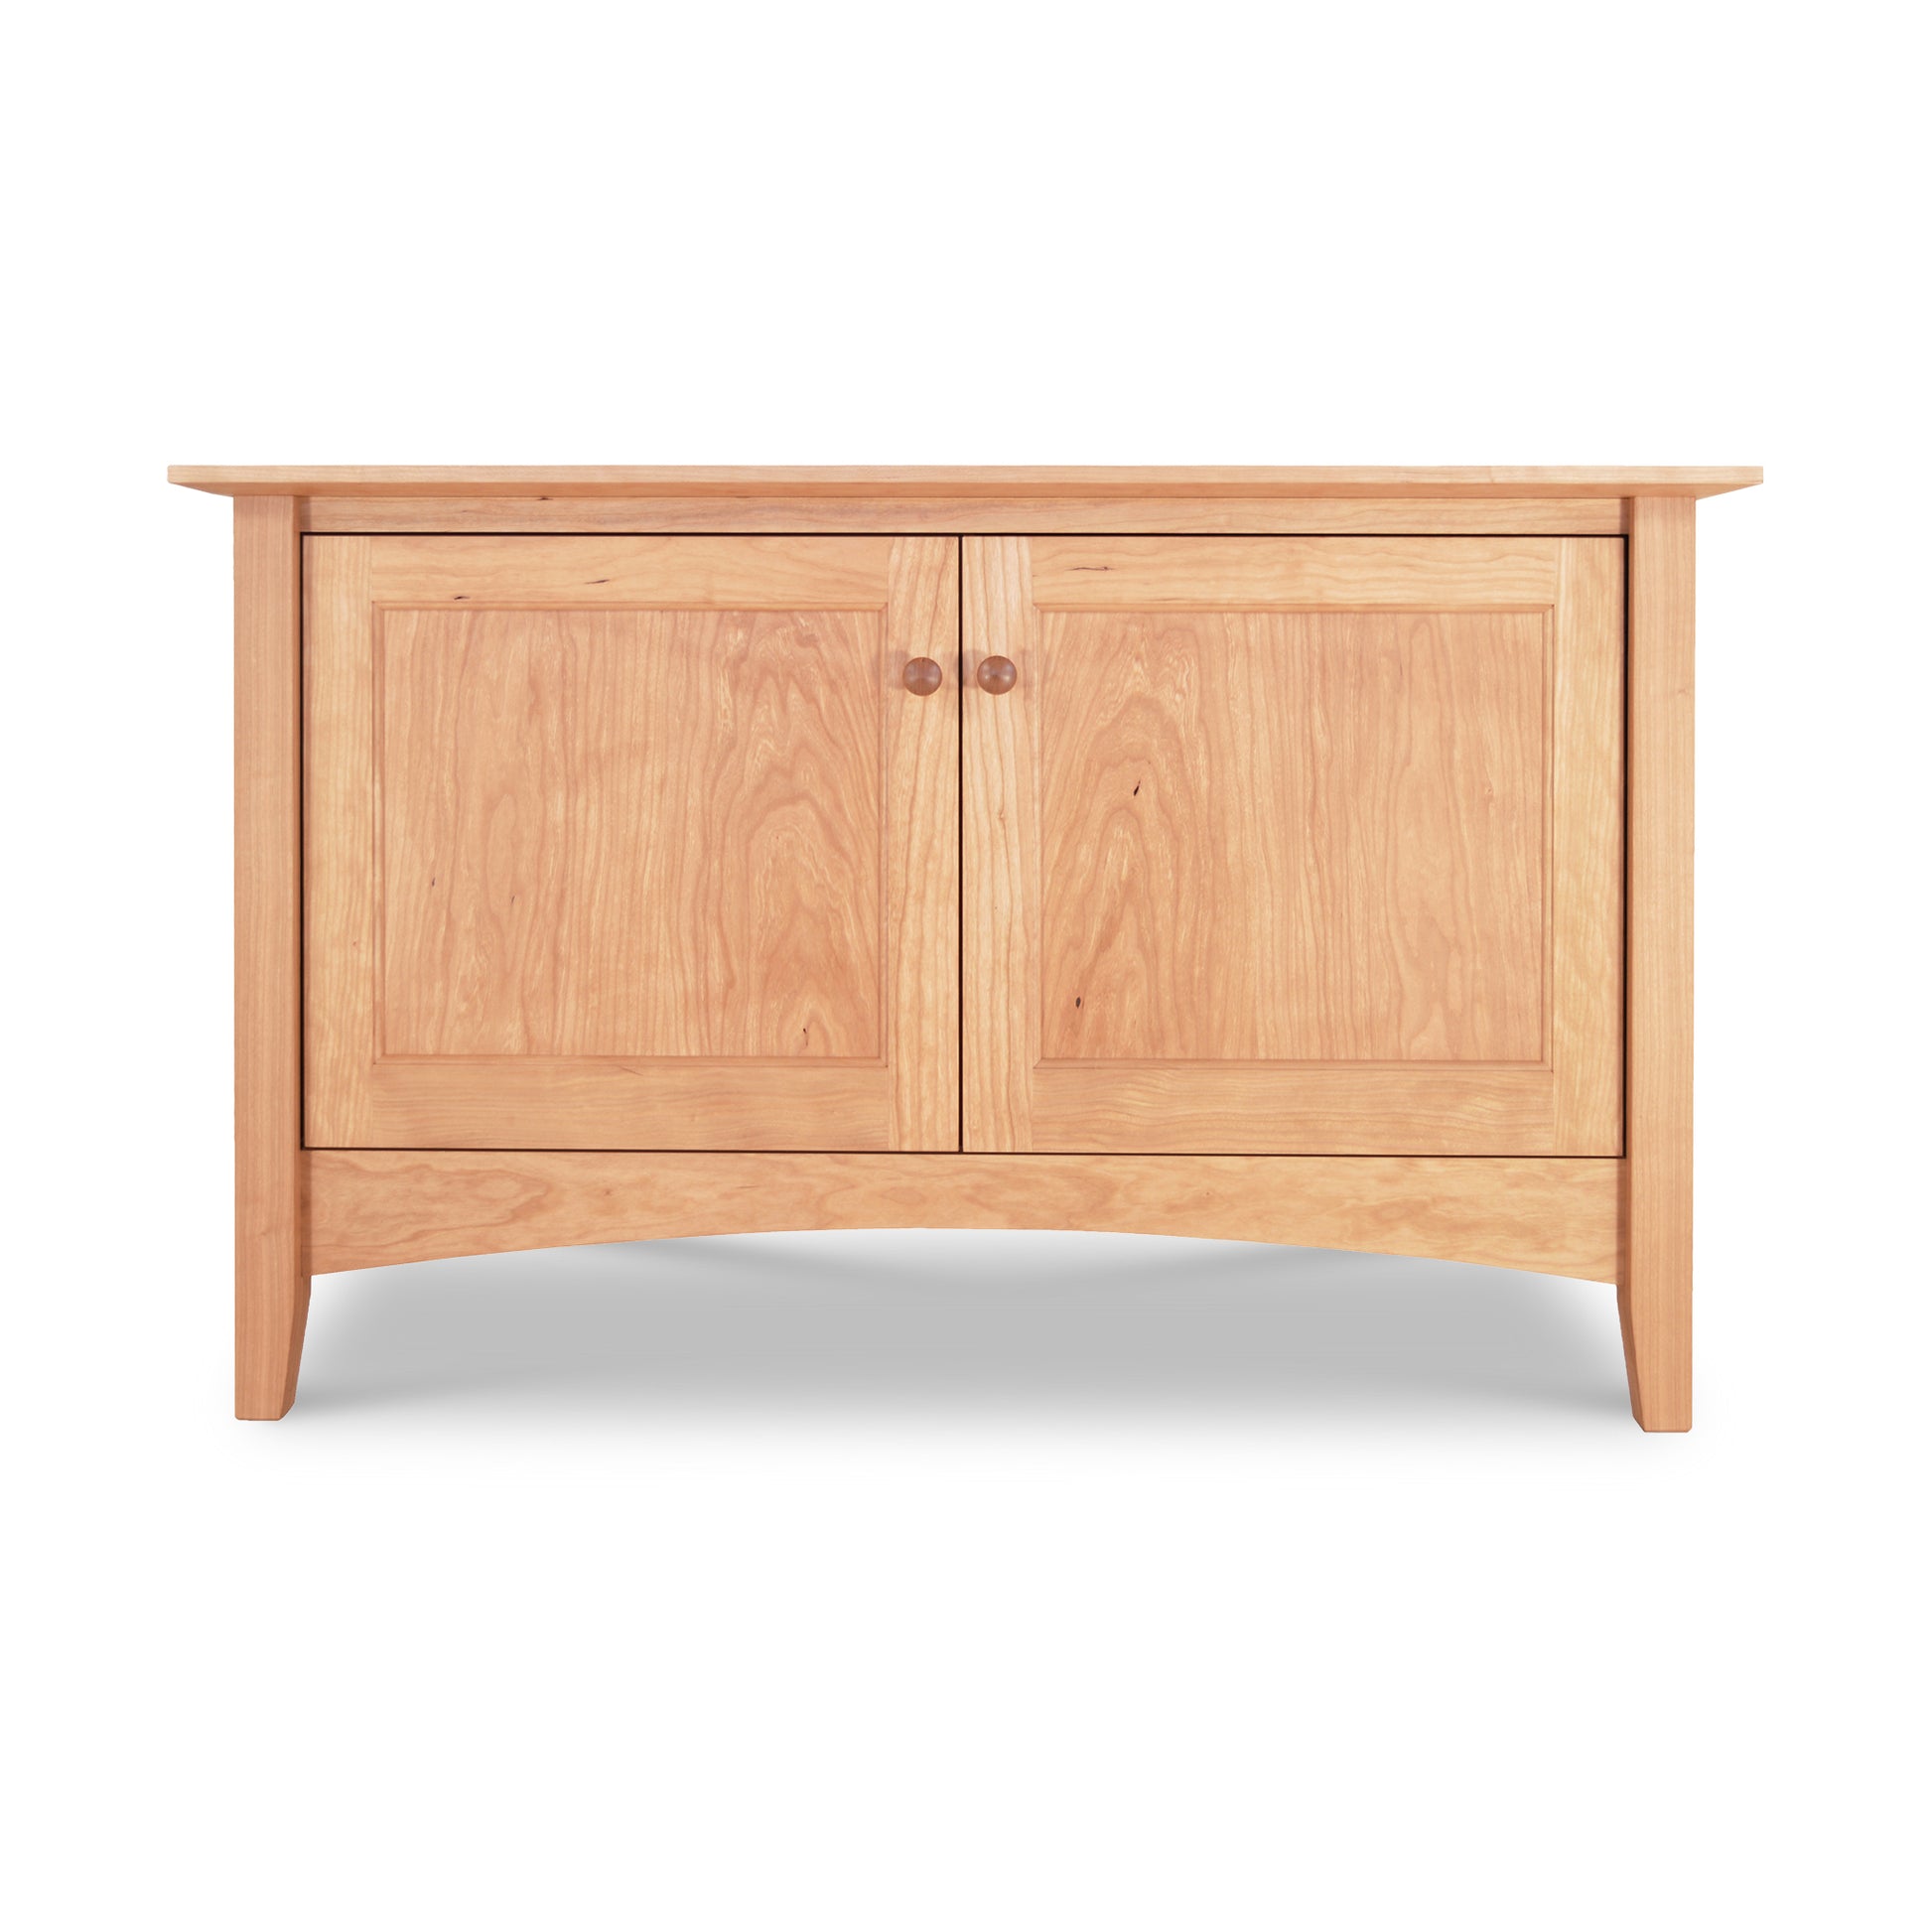 A American Shaker 48" TV Stand crafted from solid hardwoods by Maple Corner Woodworks, featuring two cabinet doors and curved legs, isolated on a white background.